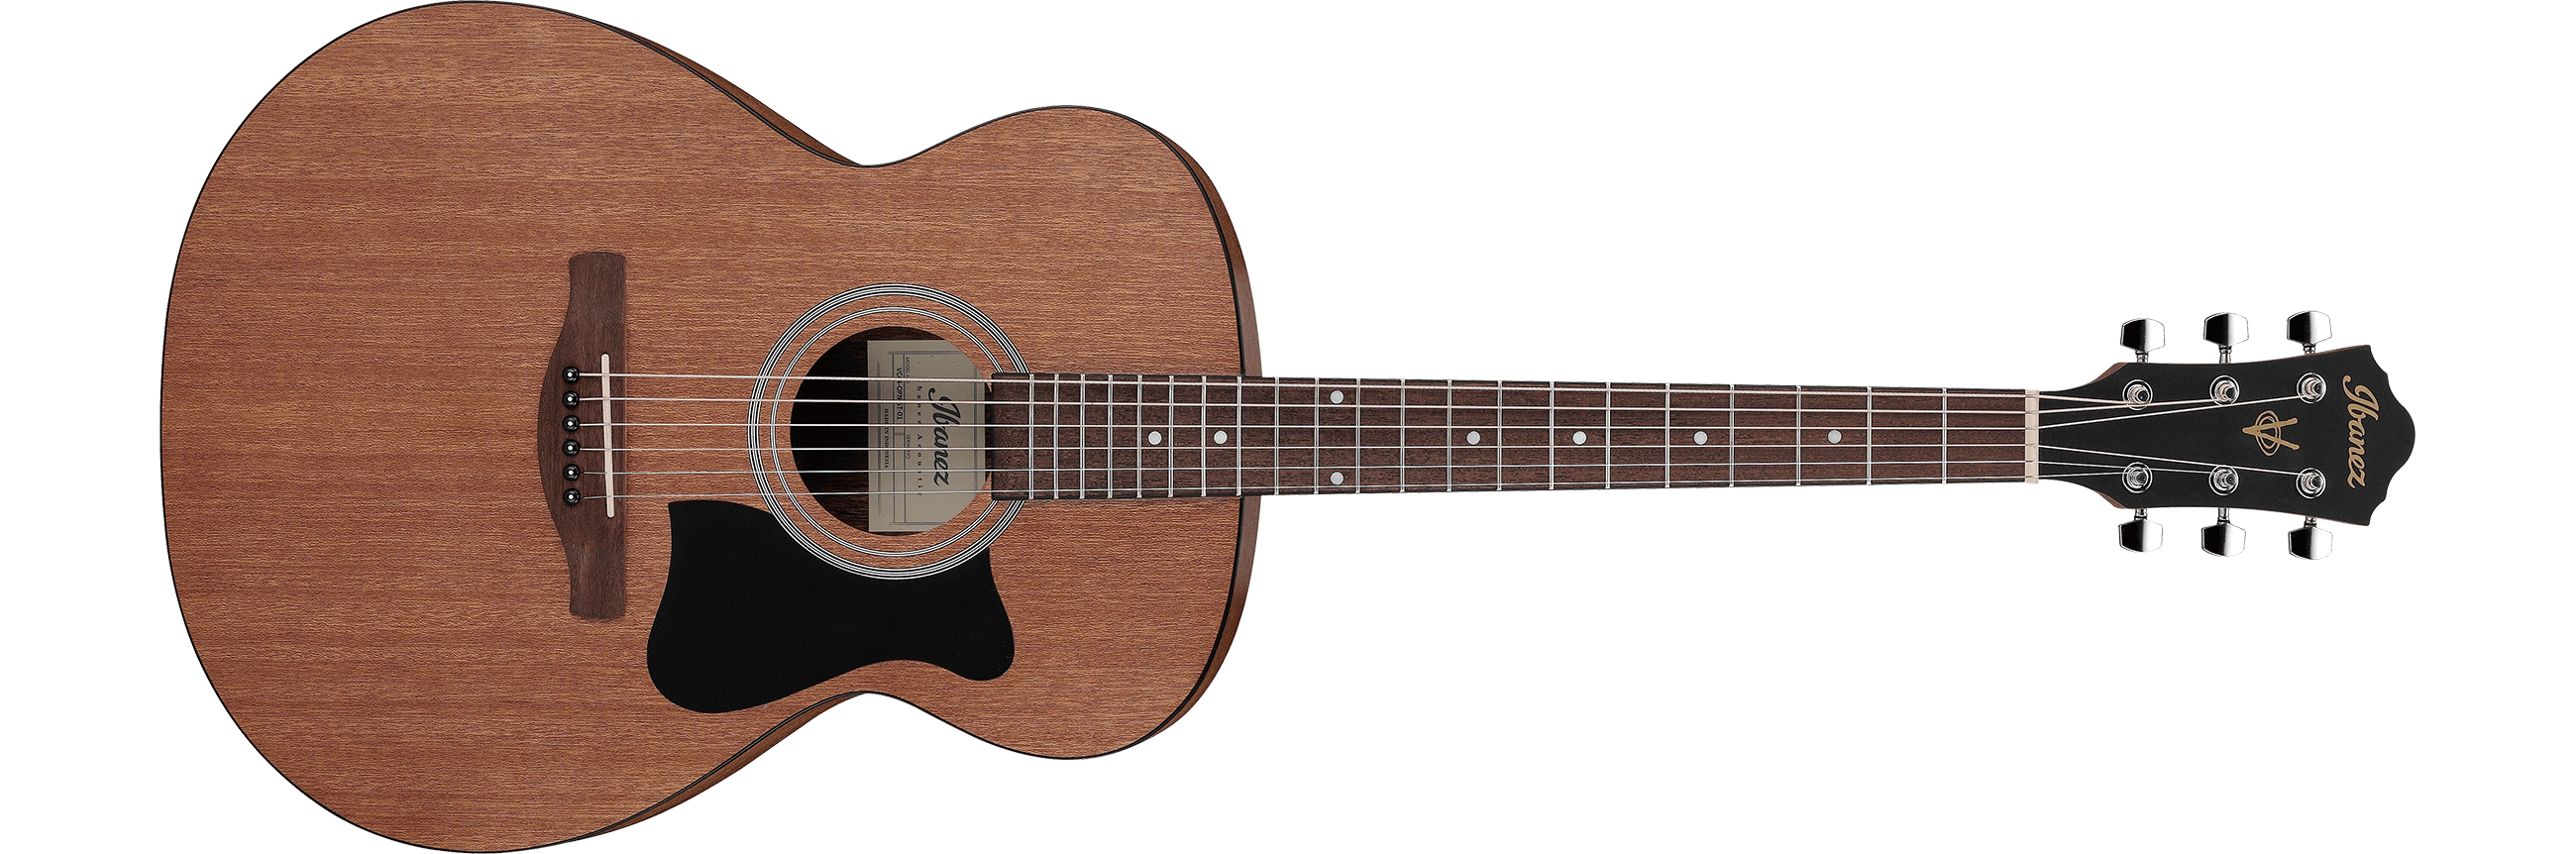 Ibanez VC44OPN 6-String RH V Series Dreadnaught Acoustic Guitar - Open Pore Natural | Jack's On Queen